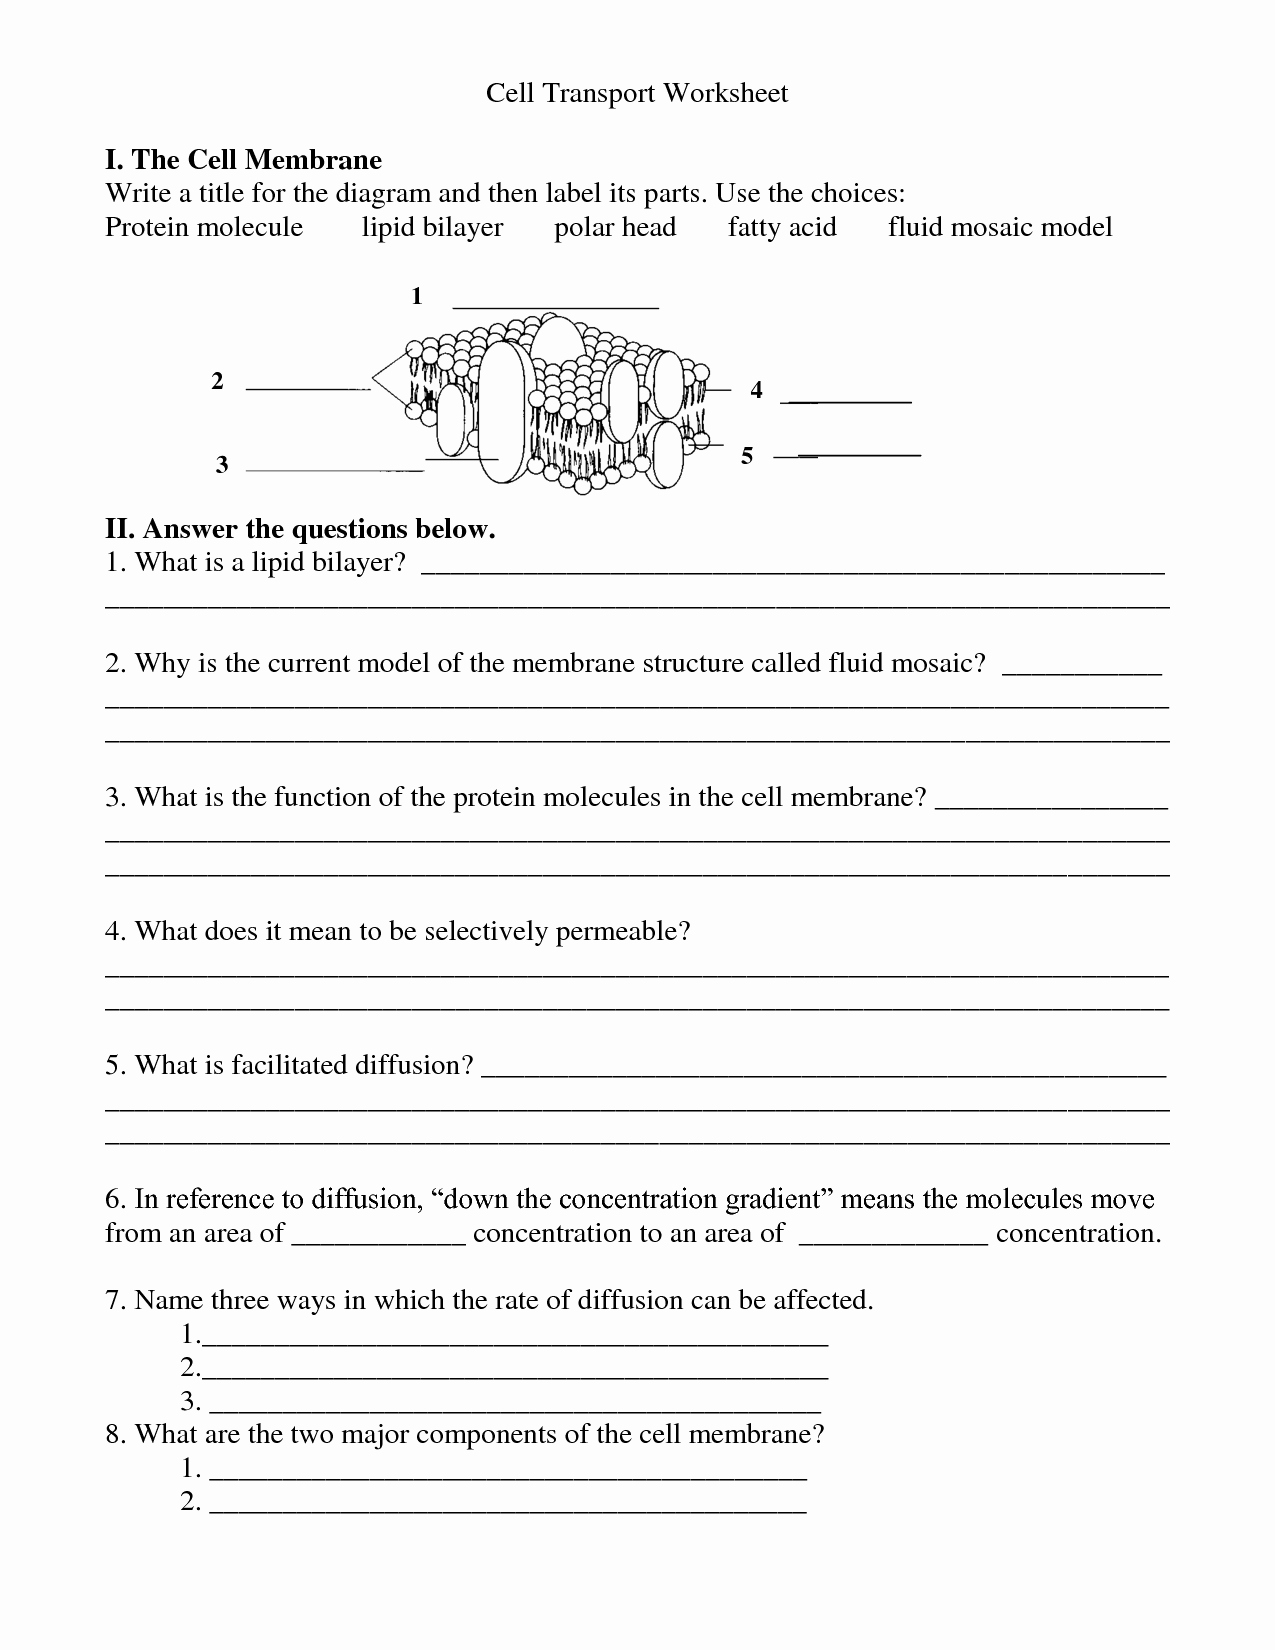 Cell Membrane Images Worksheet Answers Awesome 12 Best Of Lipid Worksheet Answers Cell Membrane